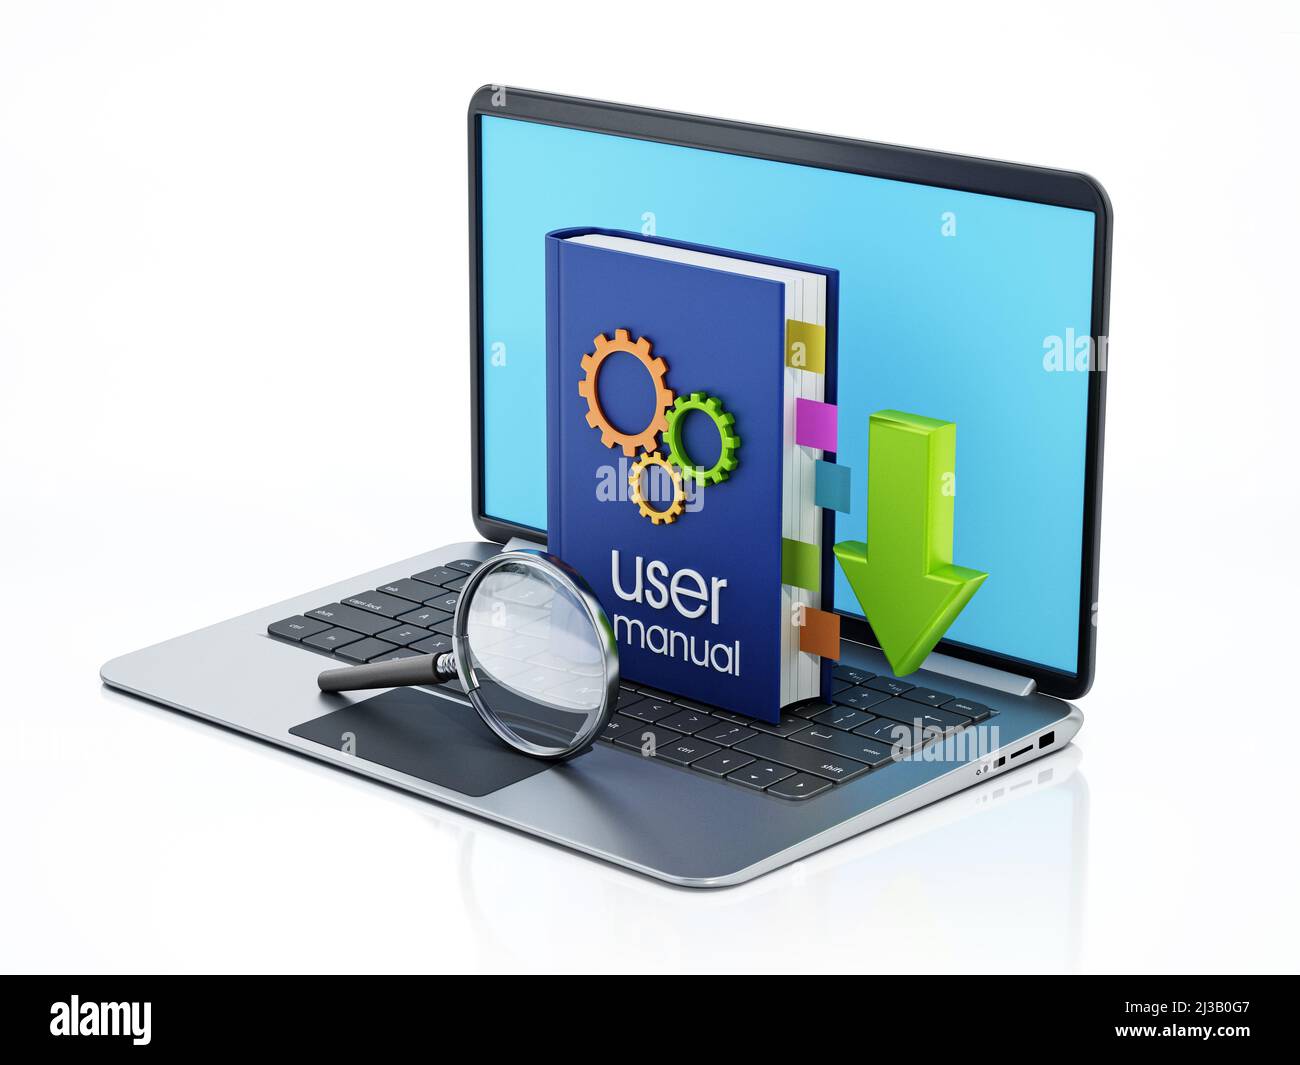 User manual, download icon and magnifying glass isolated on white background. 3D illustration. Stock Photo